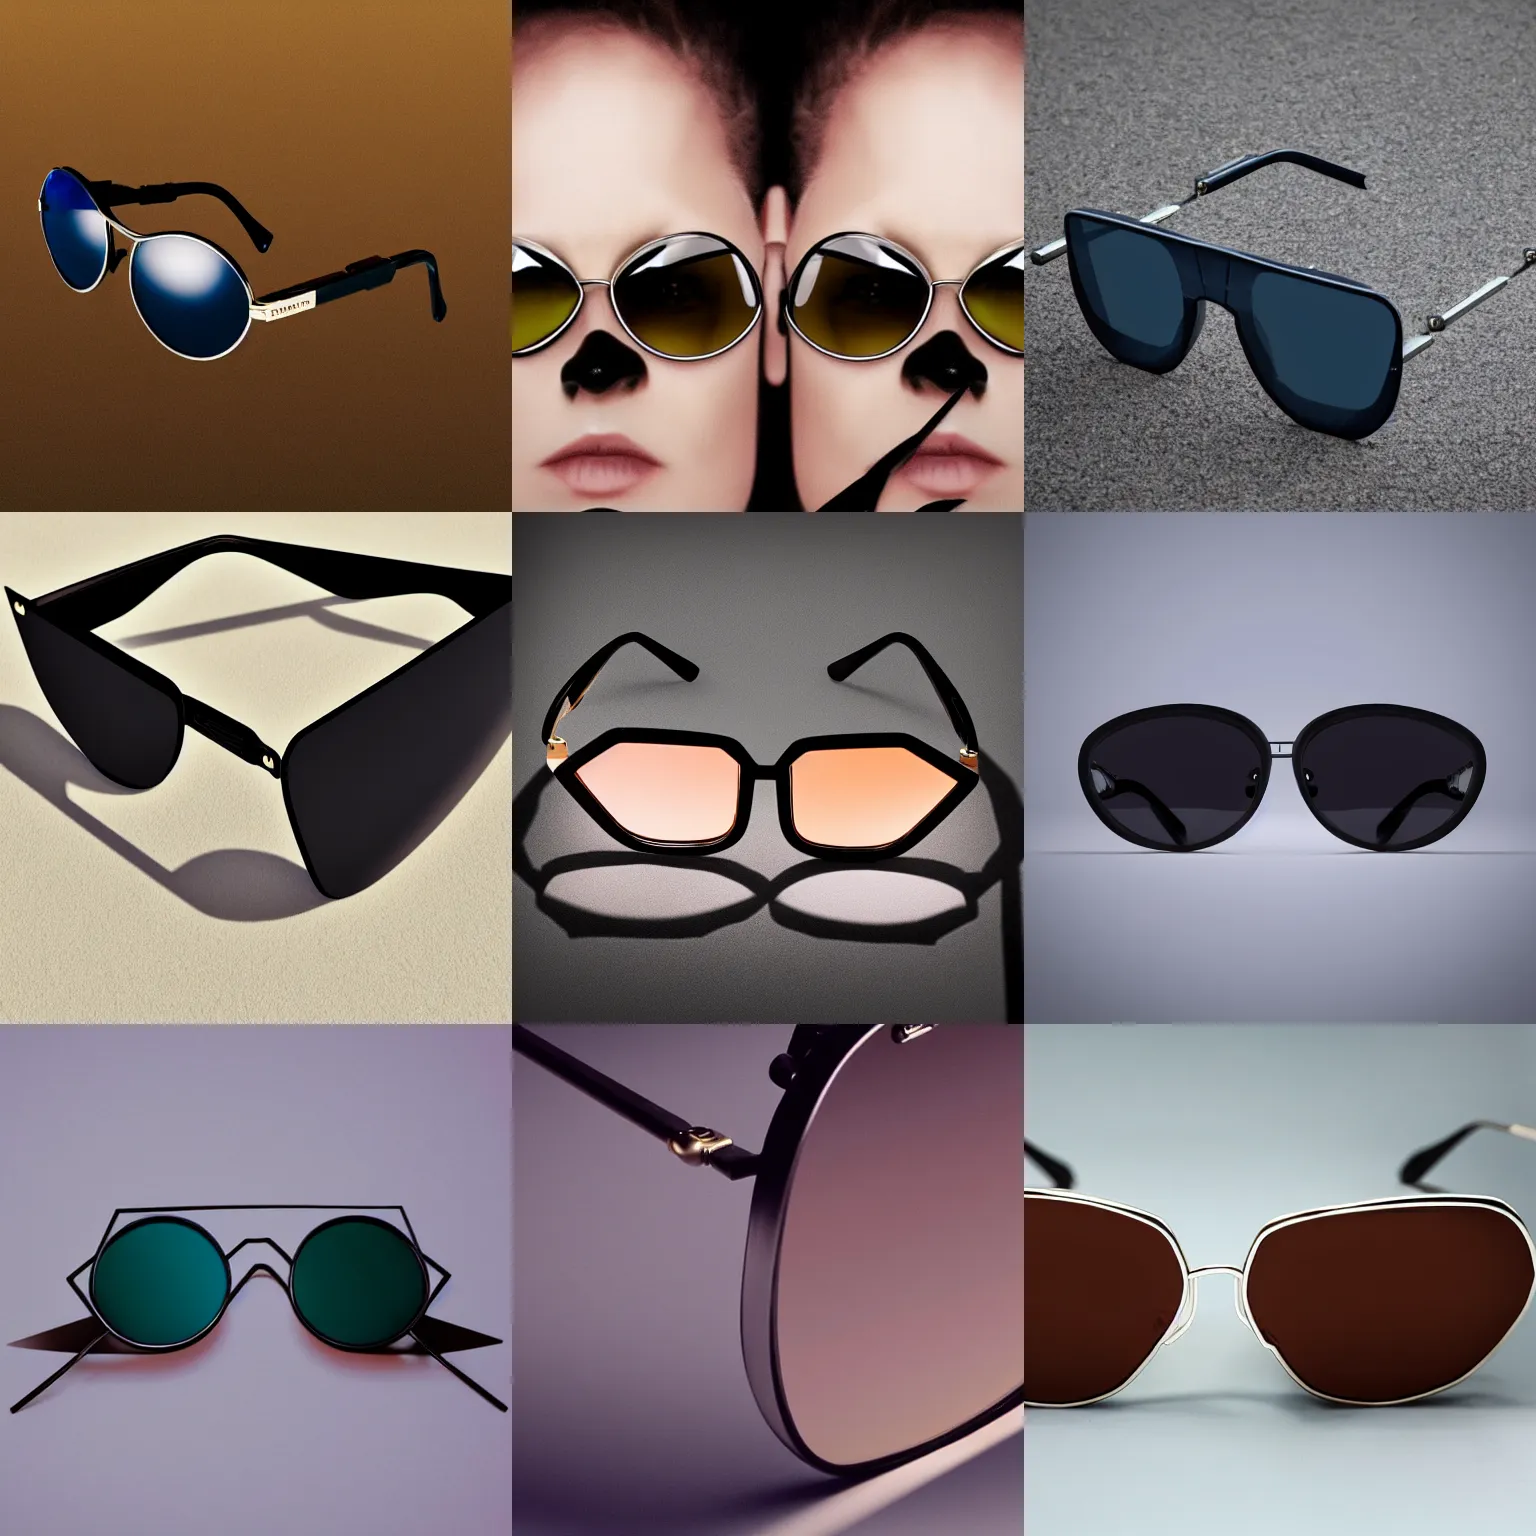 designer sunglasses, product photo, ad, high quality, | Stable Diffusion